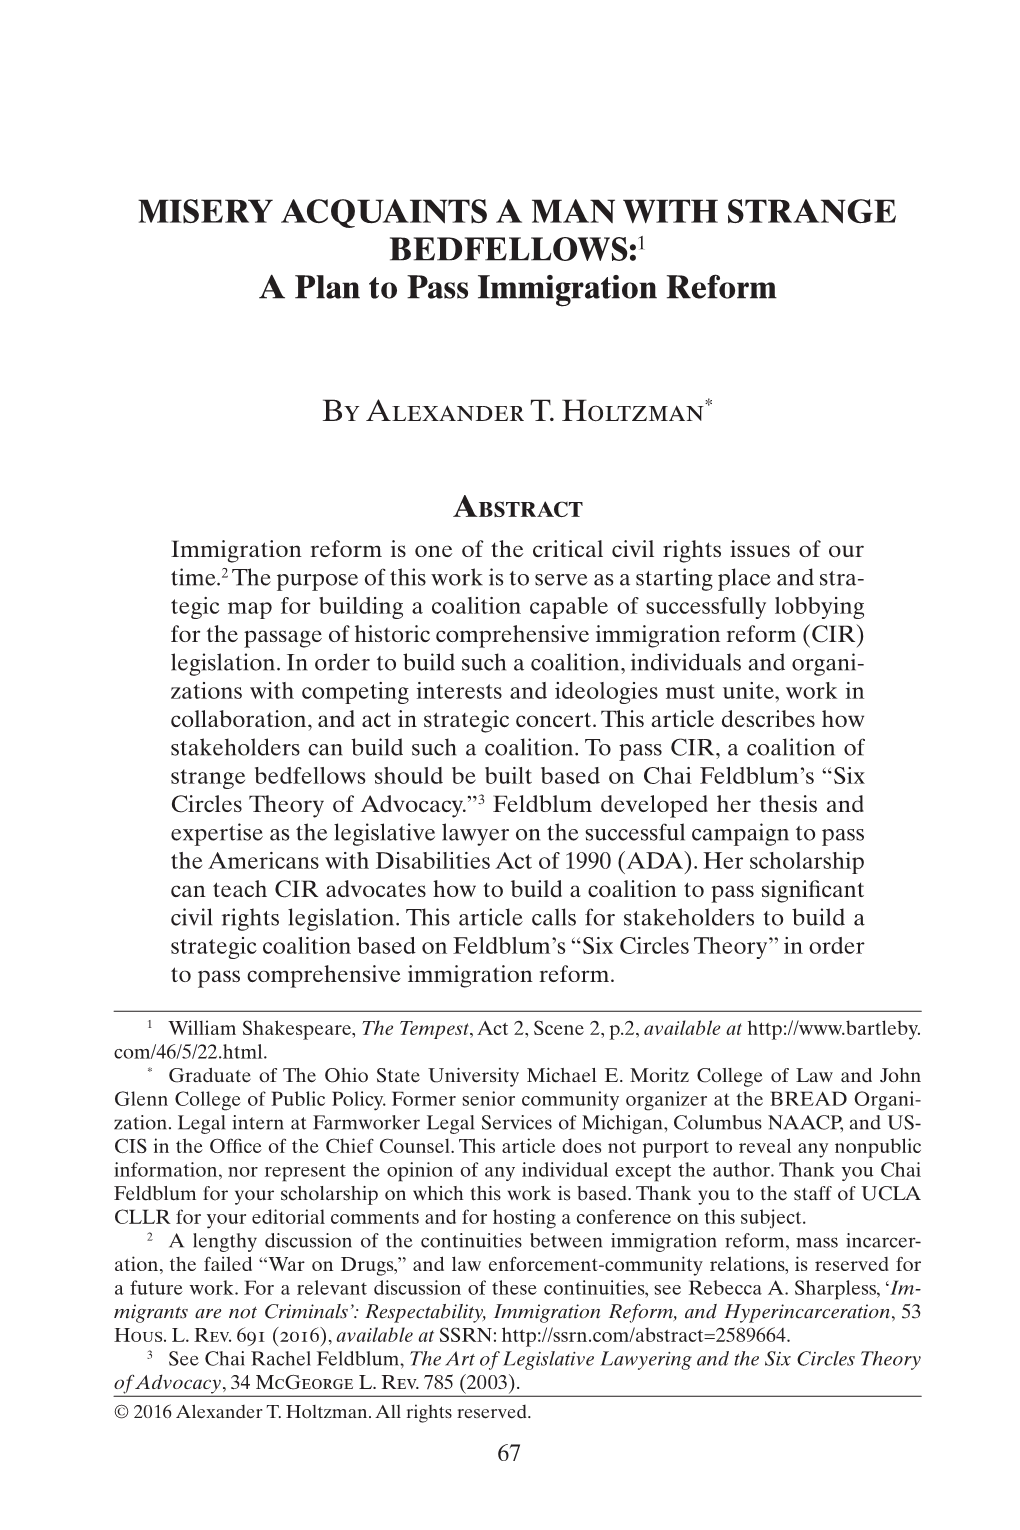 A Plan to Pass Immigration Reform